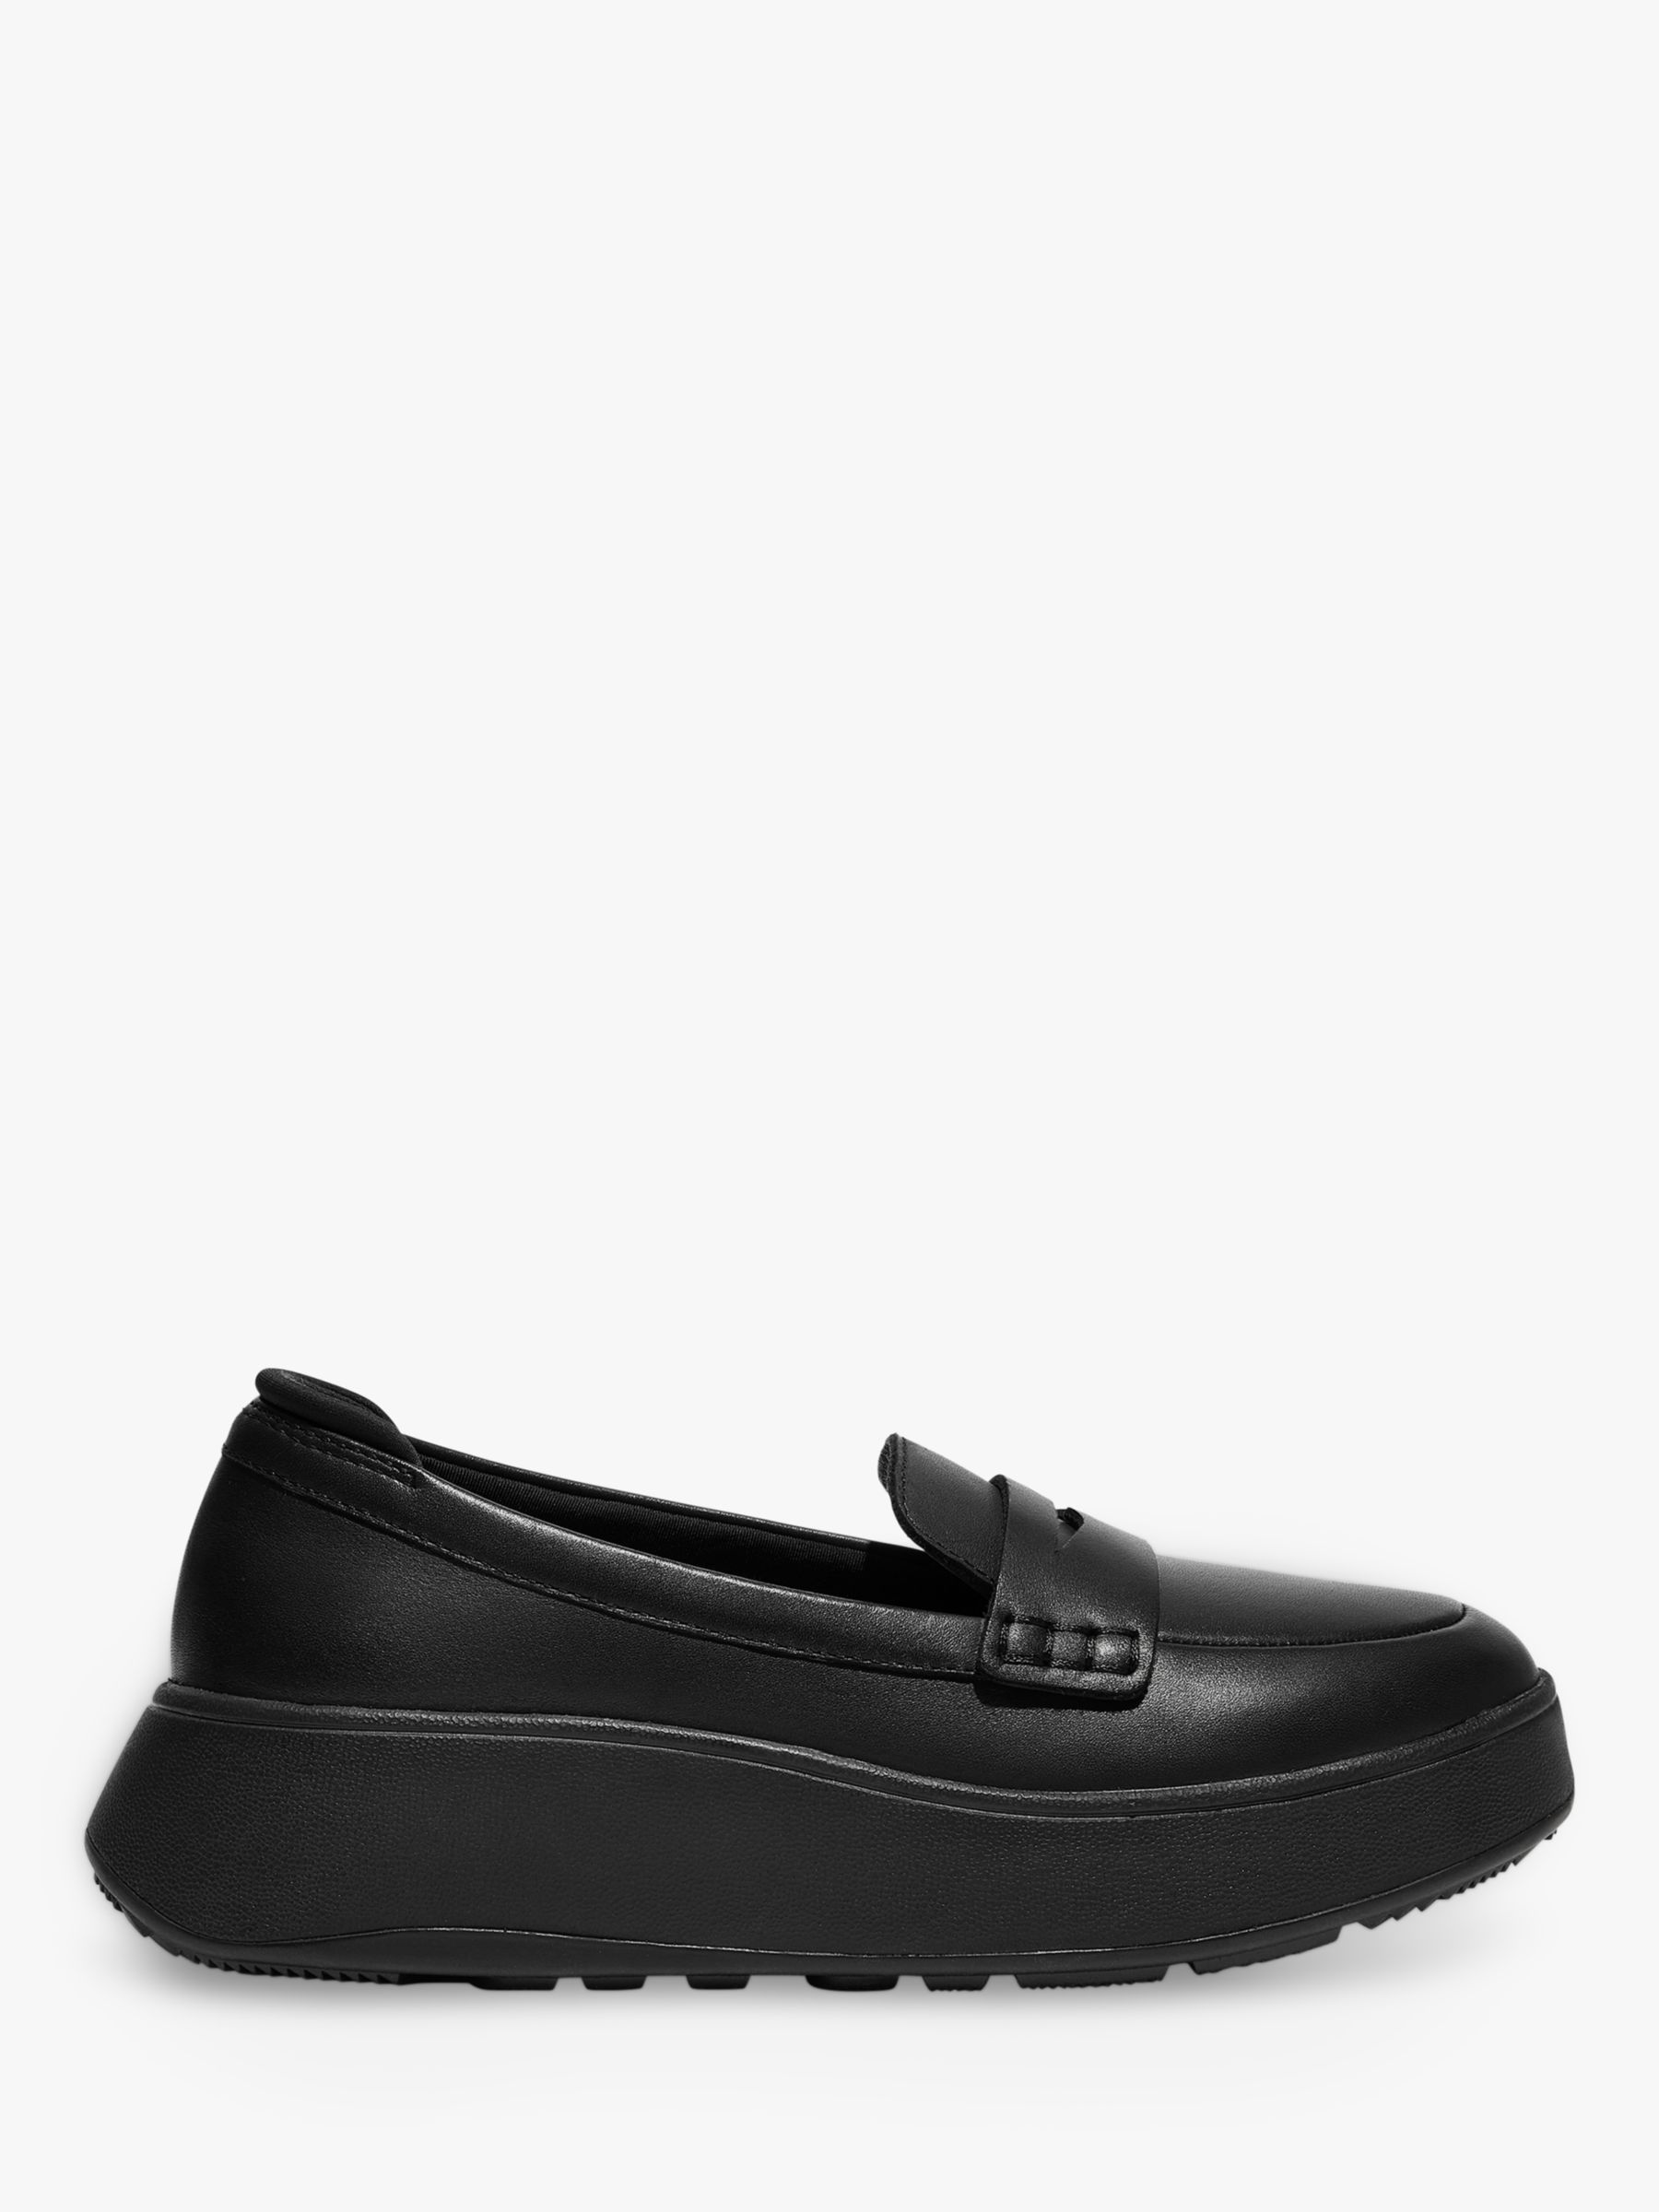 FitFlop Flatform Leather Loafers, Black at John Lewis & Partners